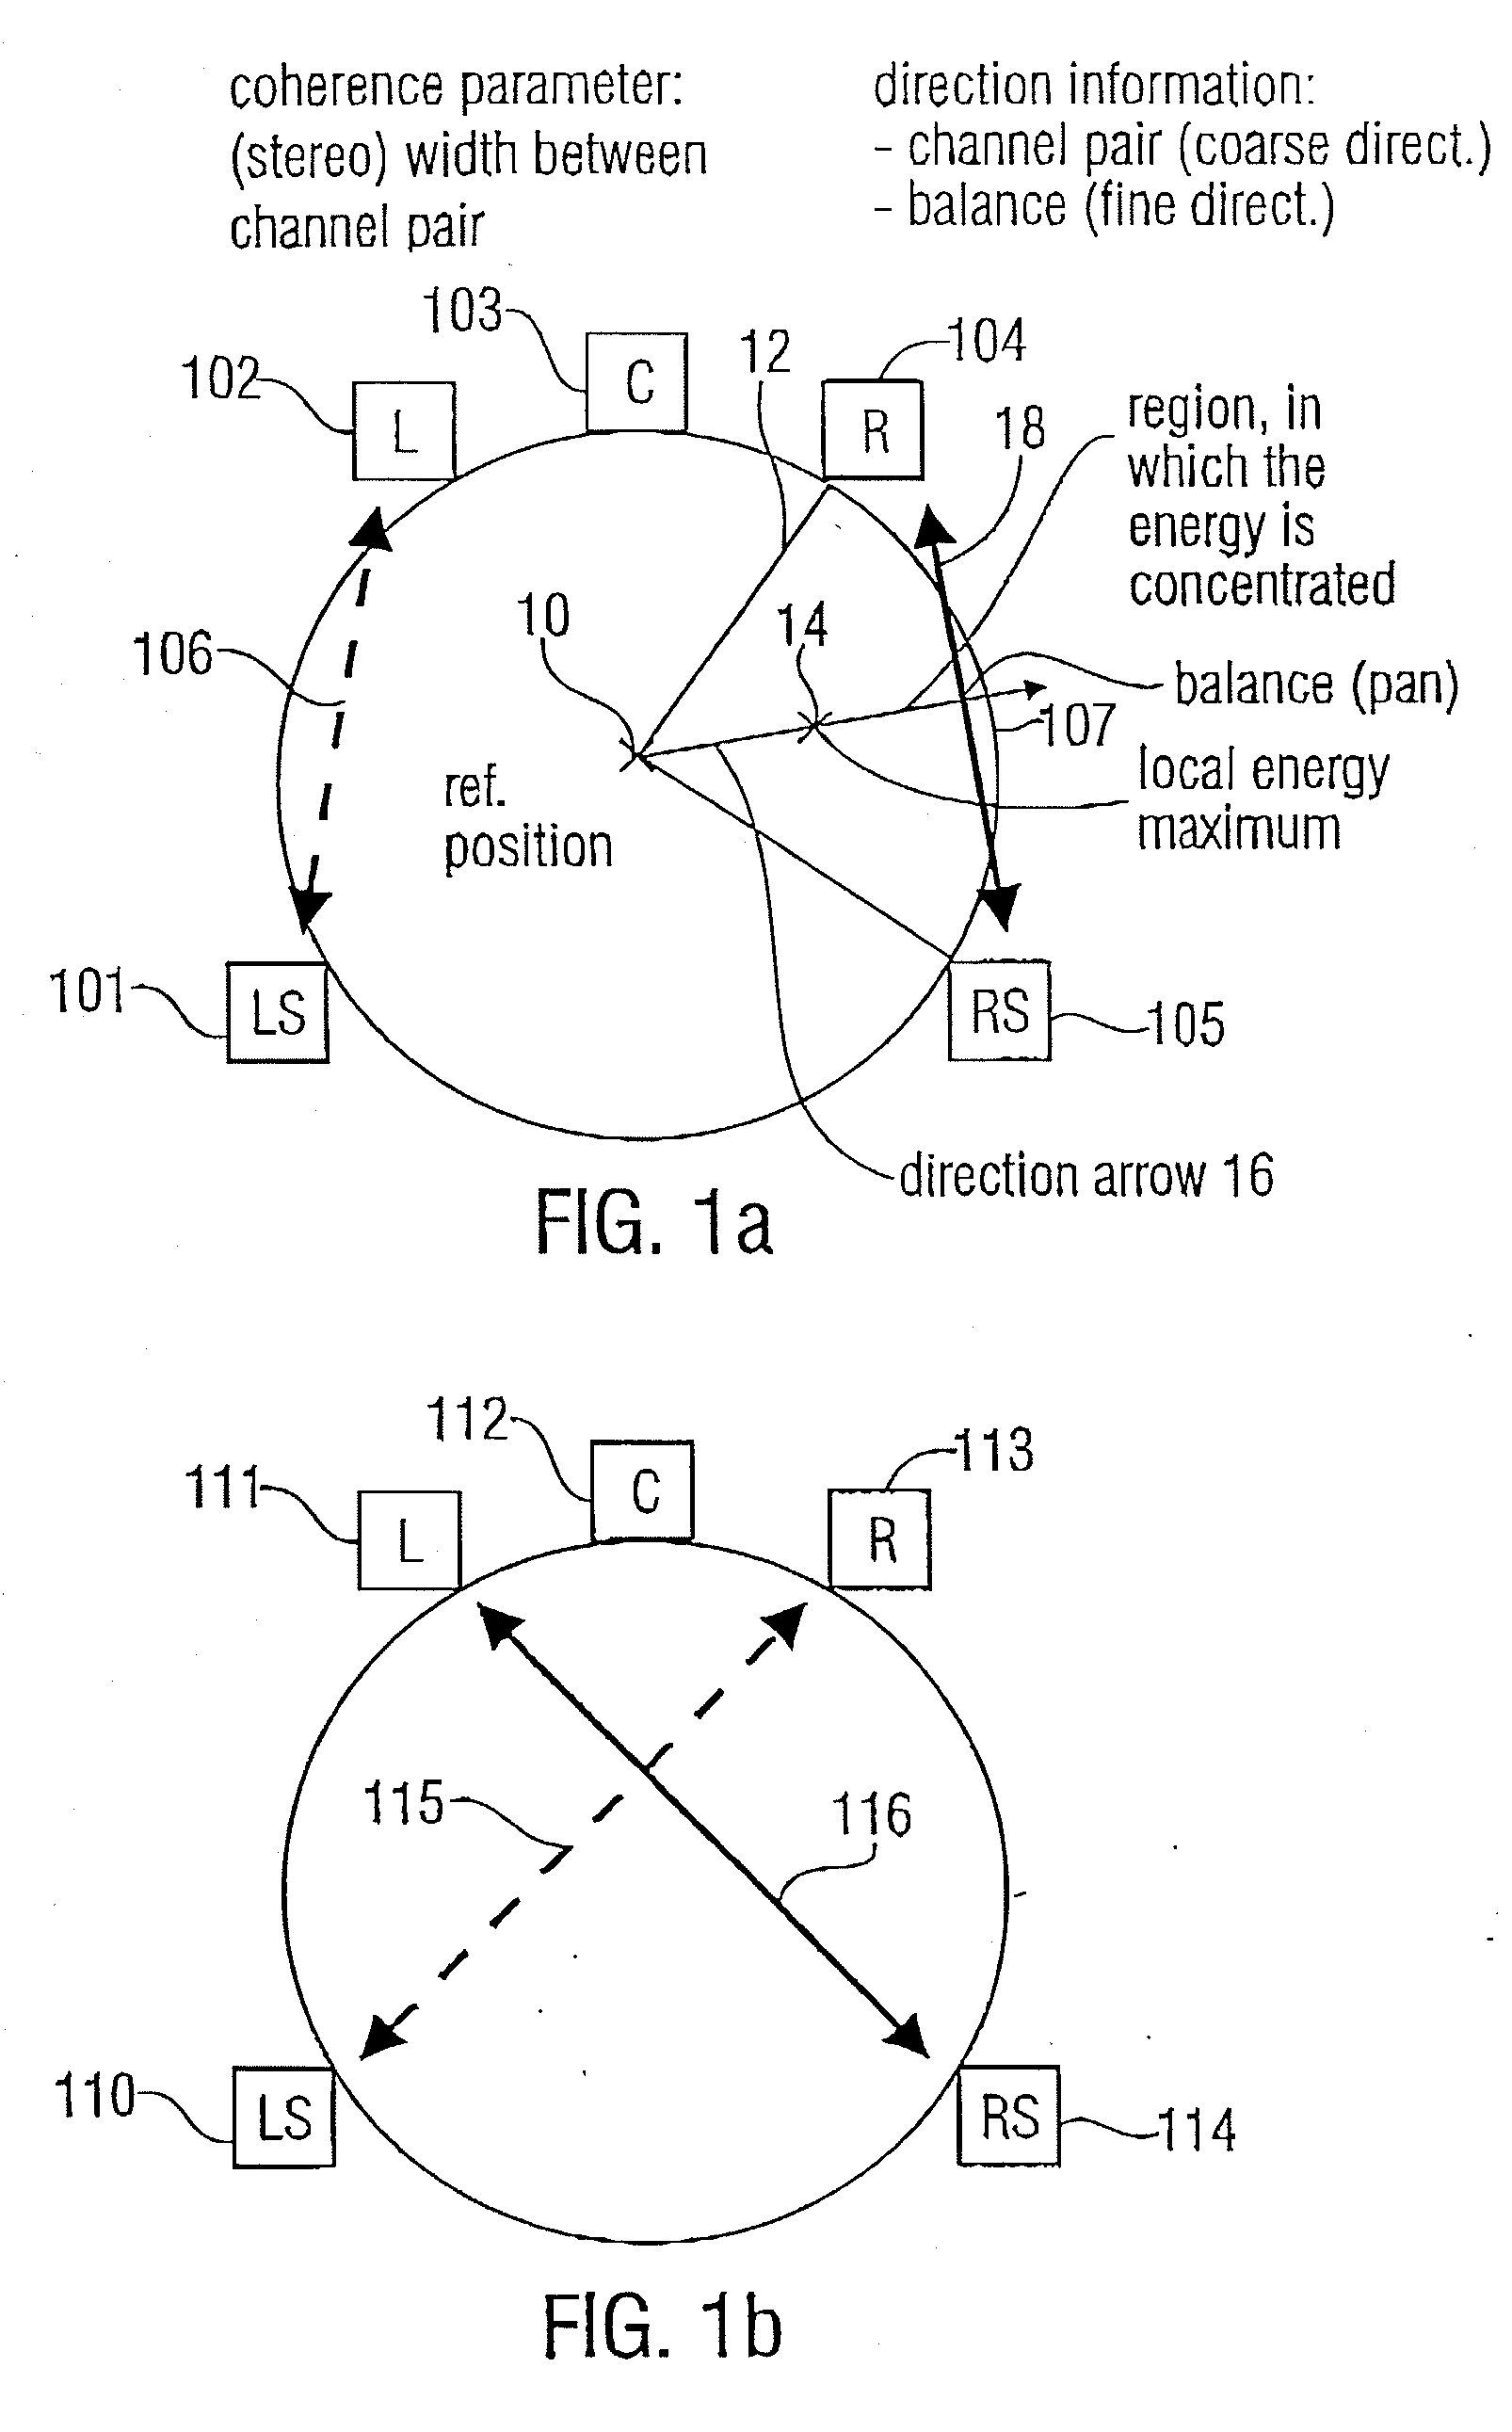 Scheme for Generating a Parametric Representation for Low-Bit Rate Applications